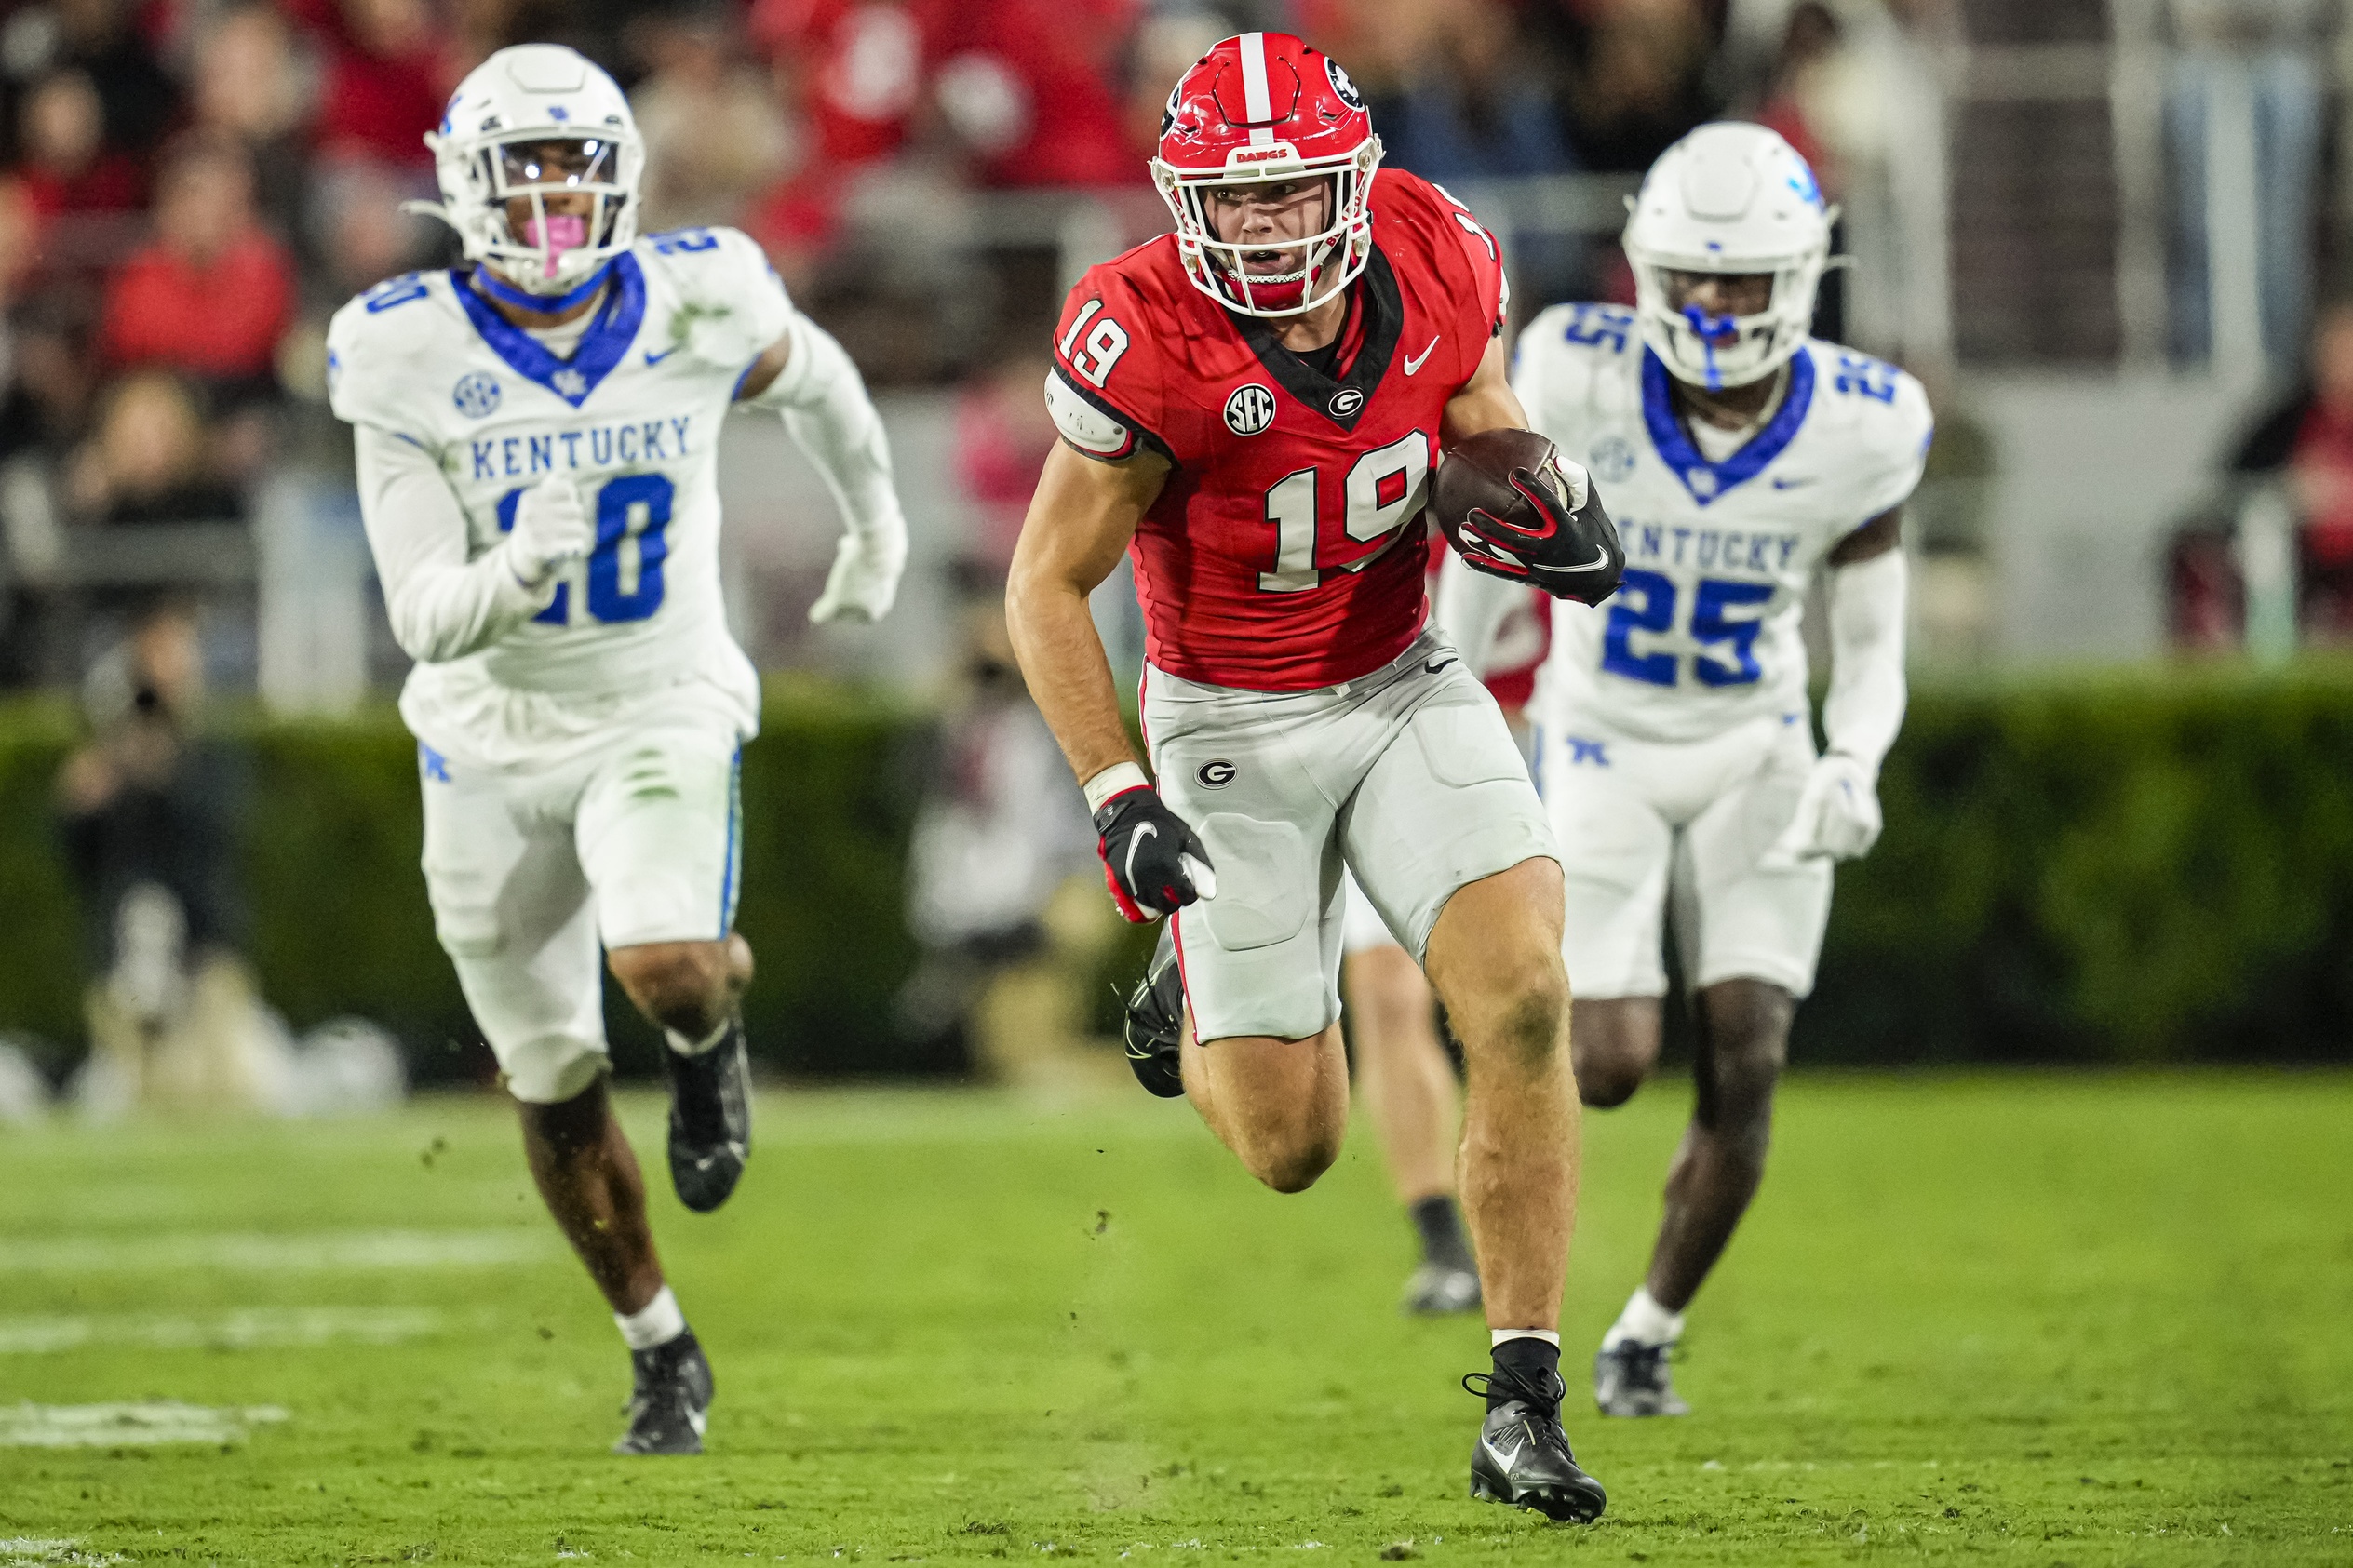 Georgia Bulldogs tight end Brock Bowers (19) runs after a catch against the Kentucky Wildcats. Mandatory Credit: Dale Zanine-USA TODAY Sports